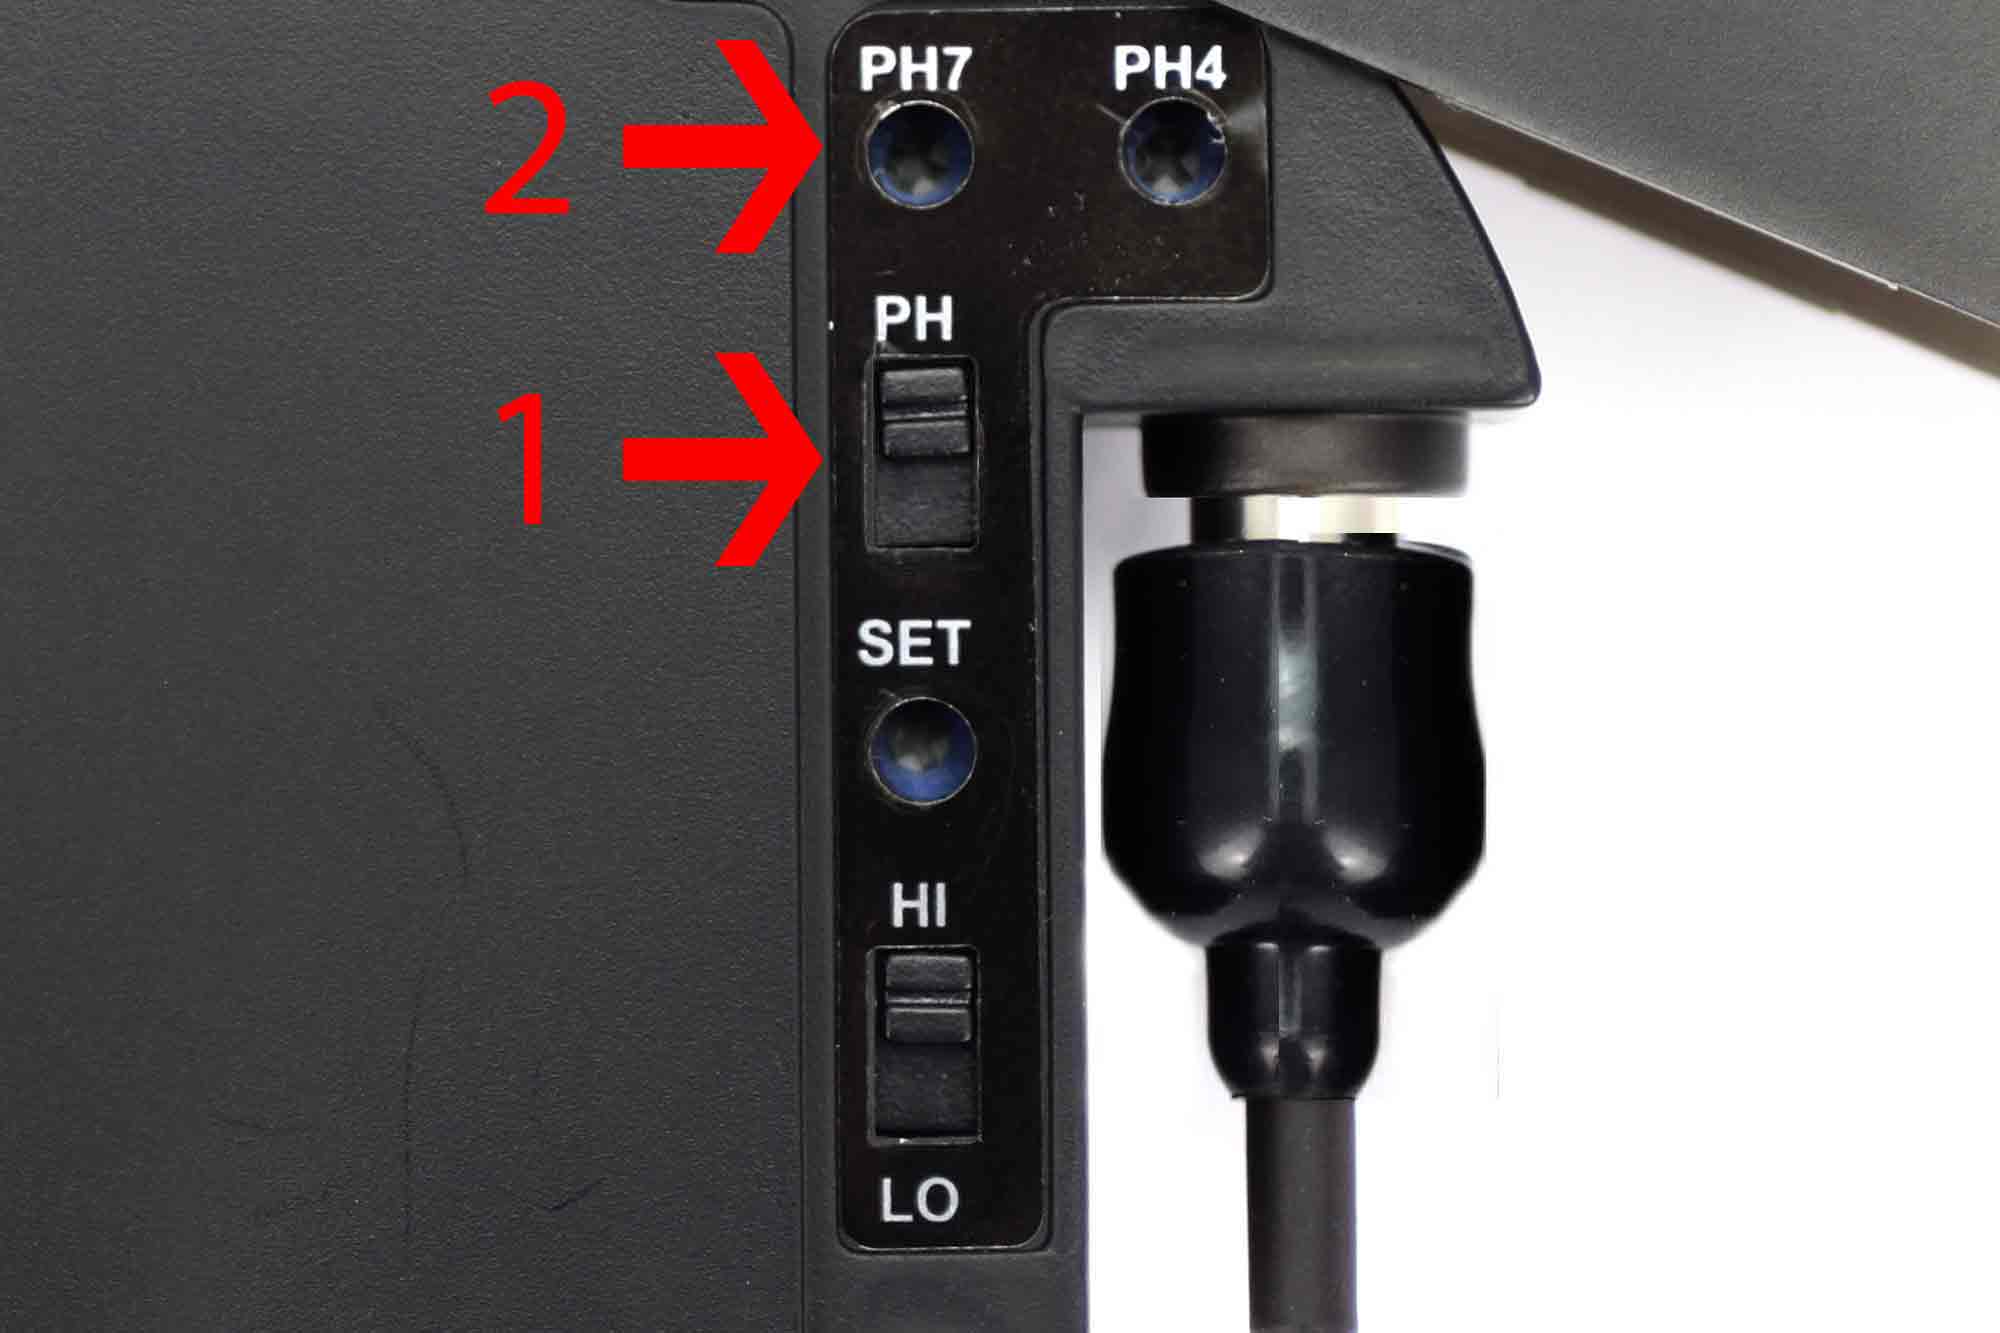 Setting to pH 7 on the controller unit